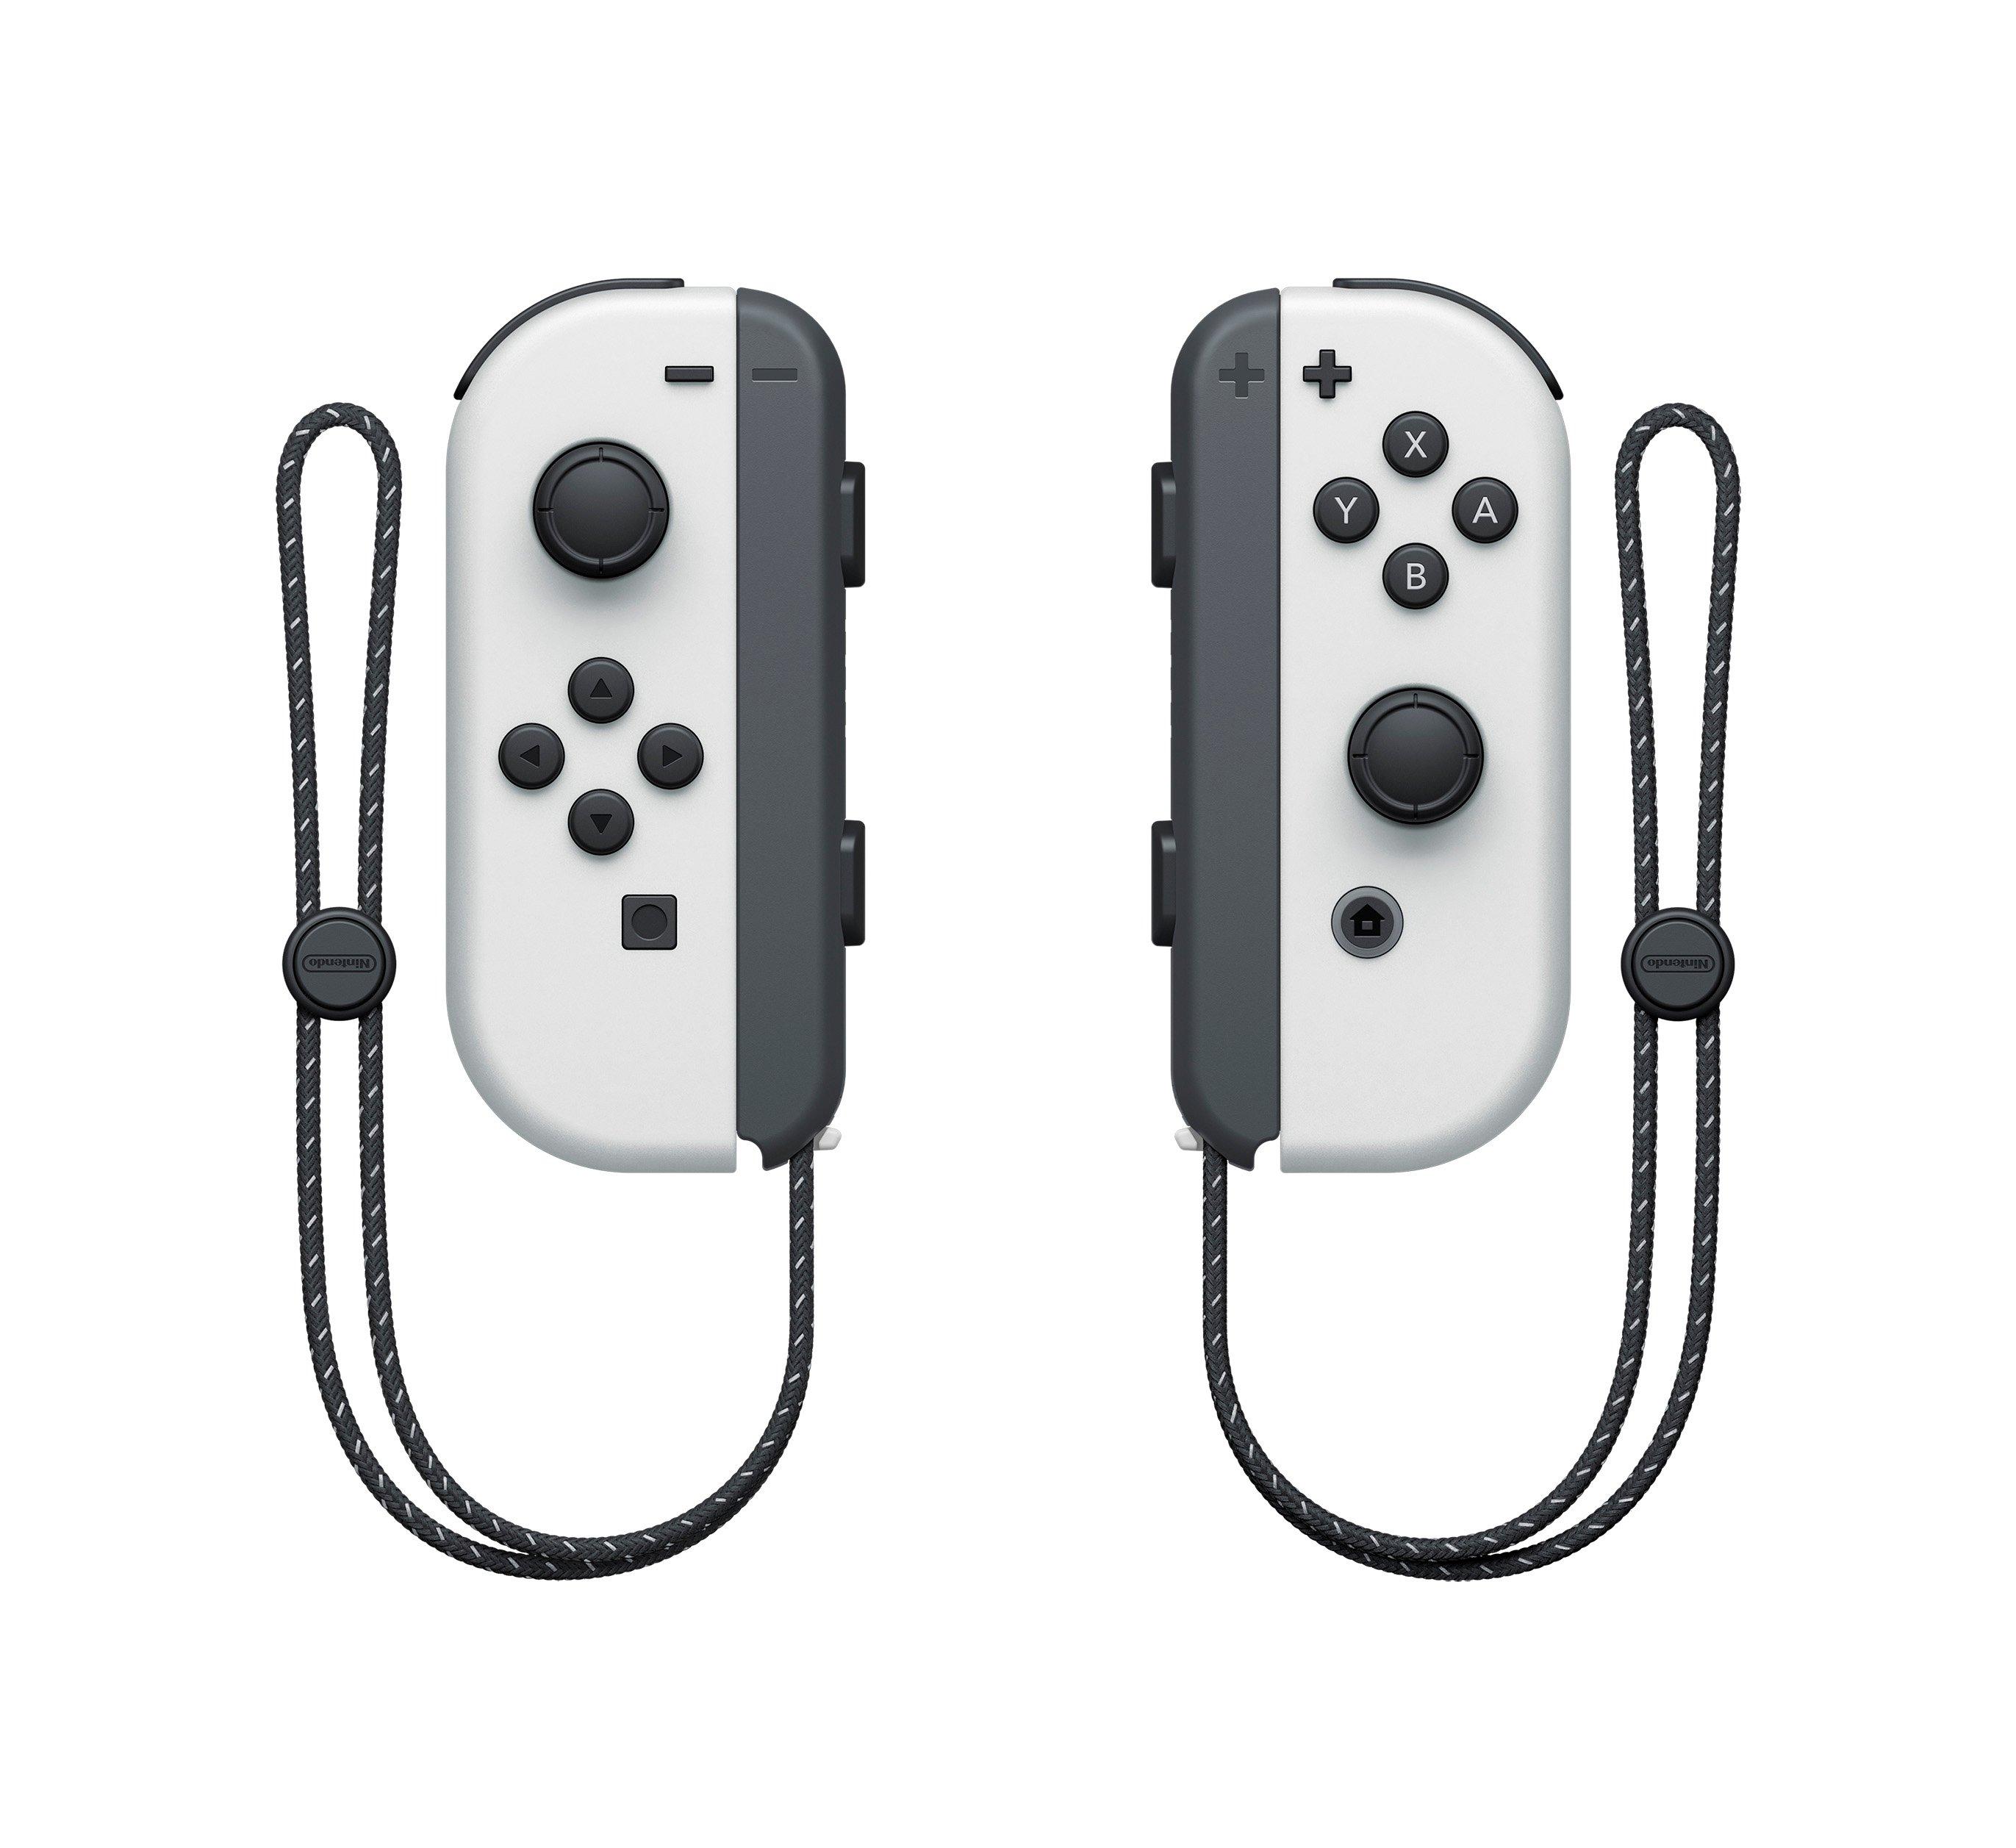 Paralyze repetition A lot of nice good Nintendo Switch OLED with White Joy-Con